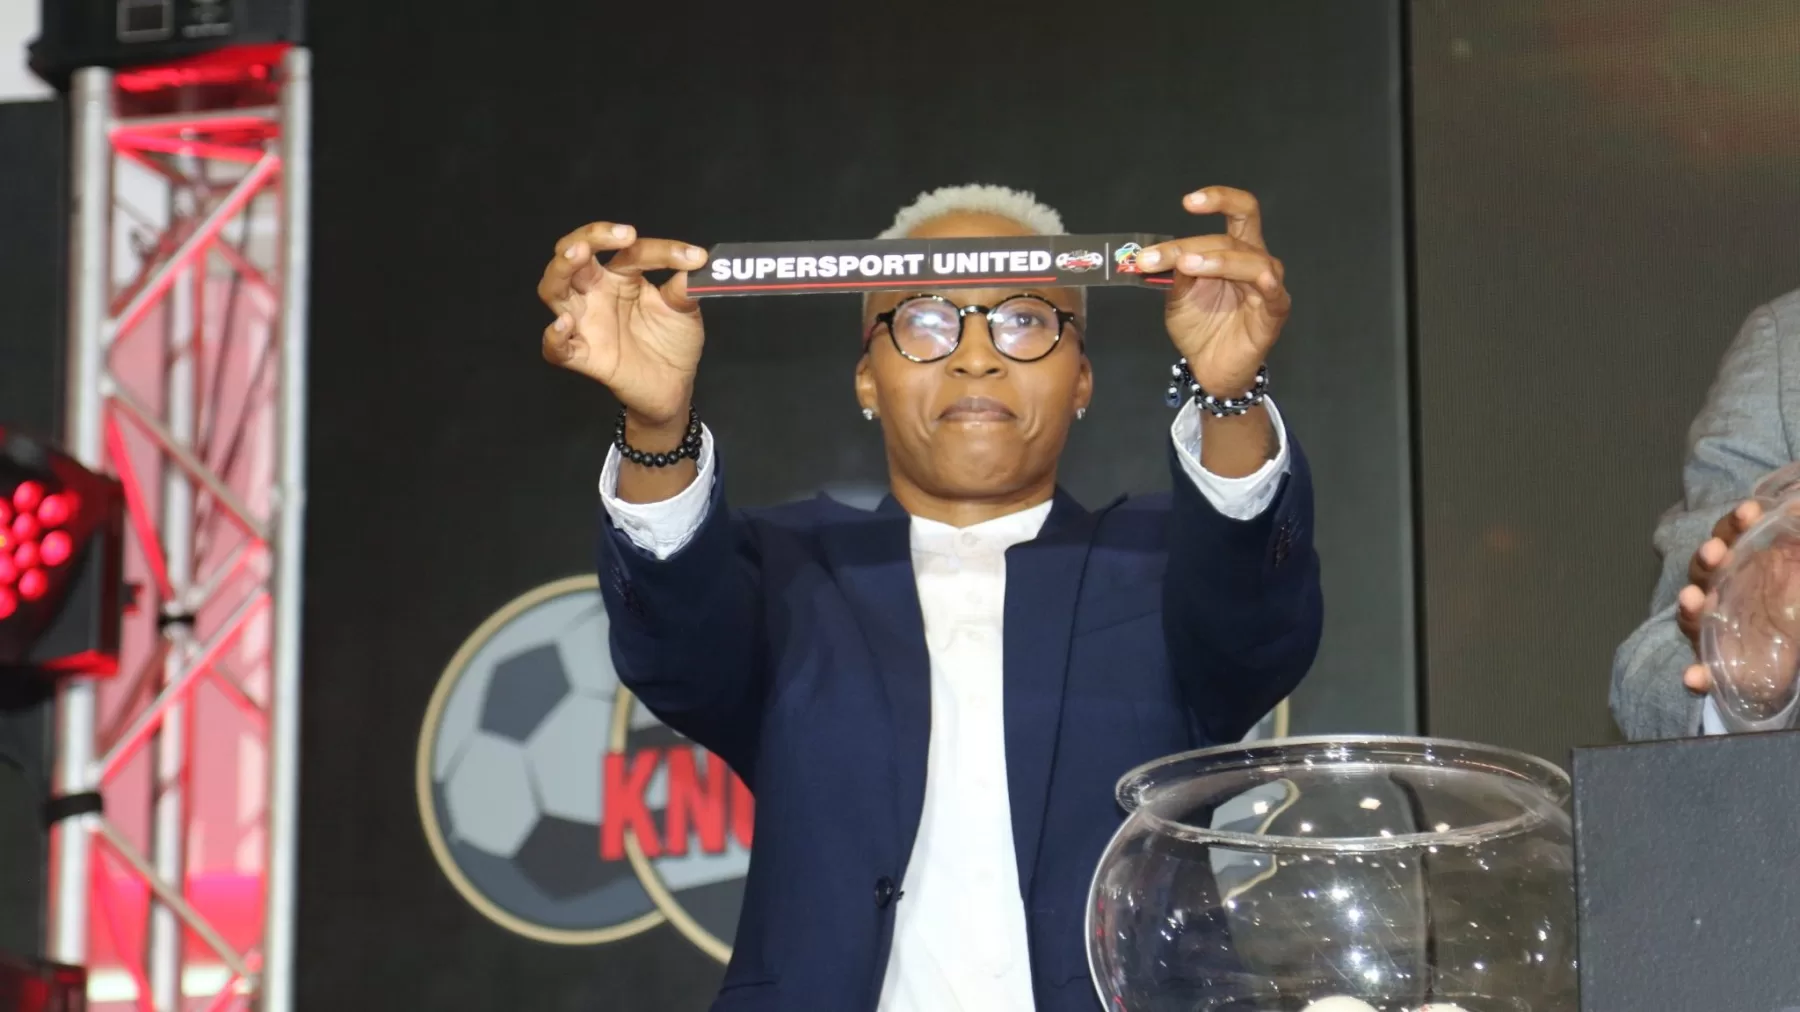 SuperSport United coach Gavin Hunt lauds the introduction of more domestic PSL competitions